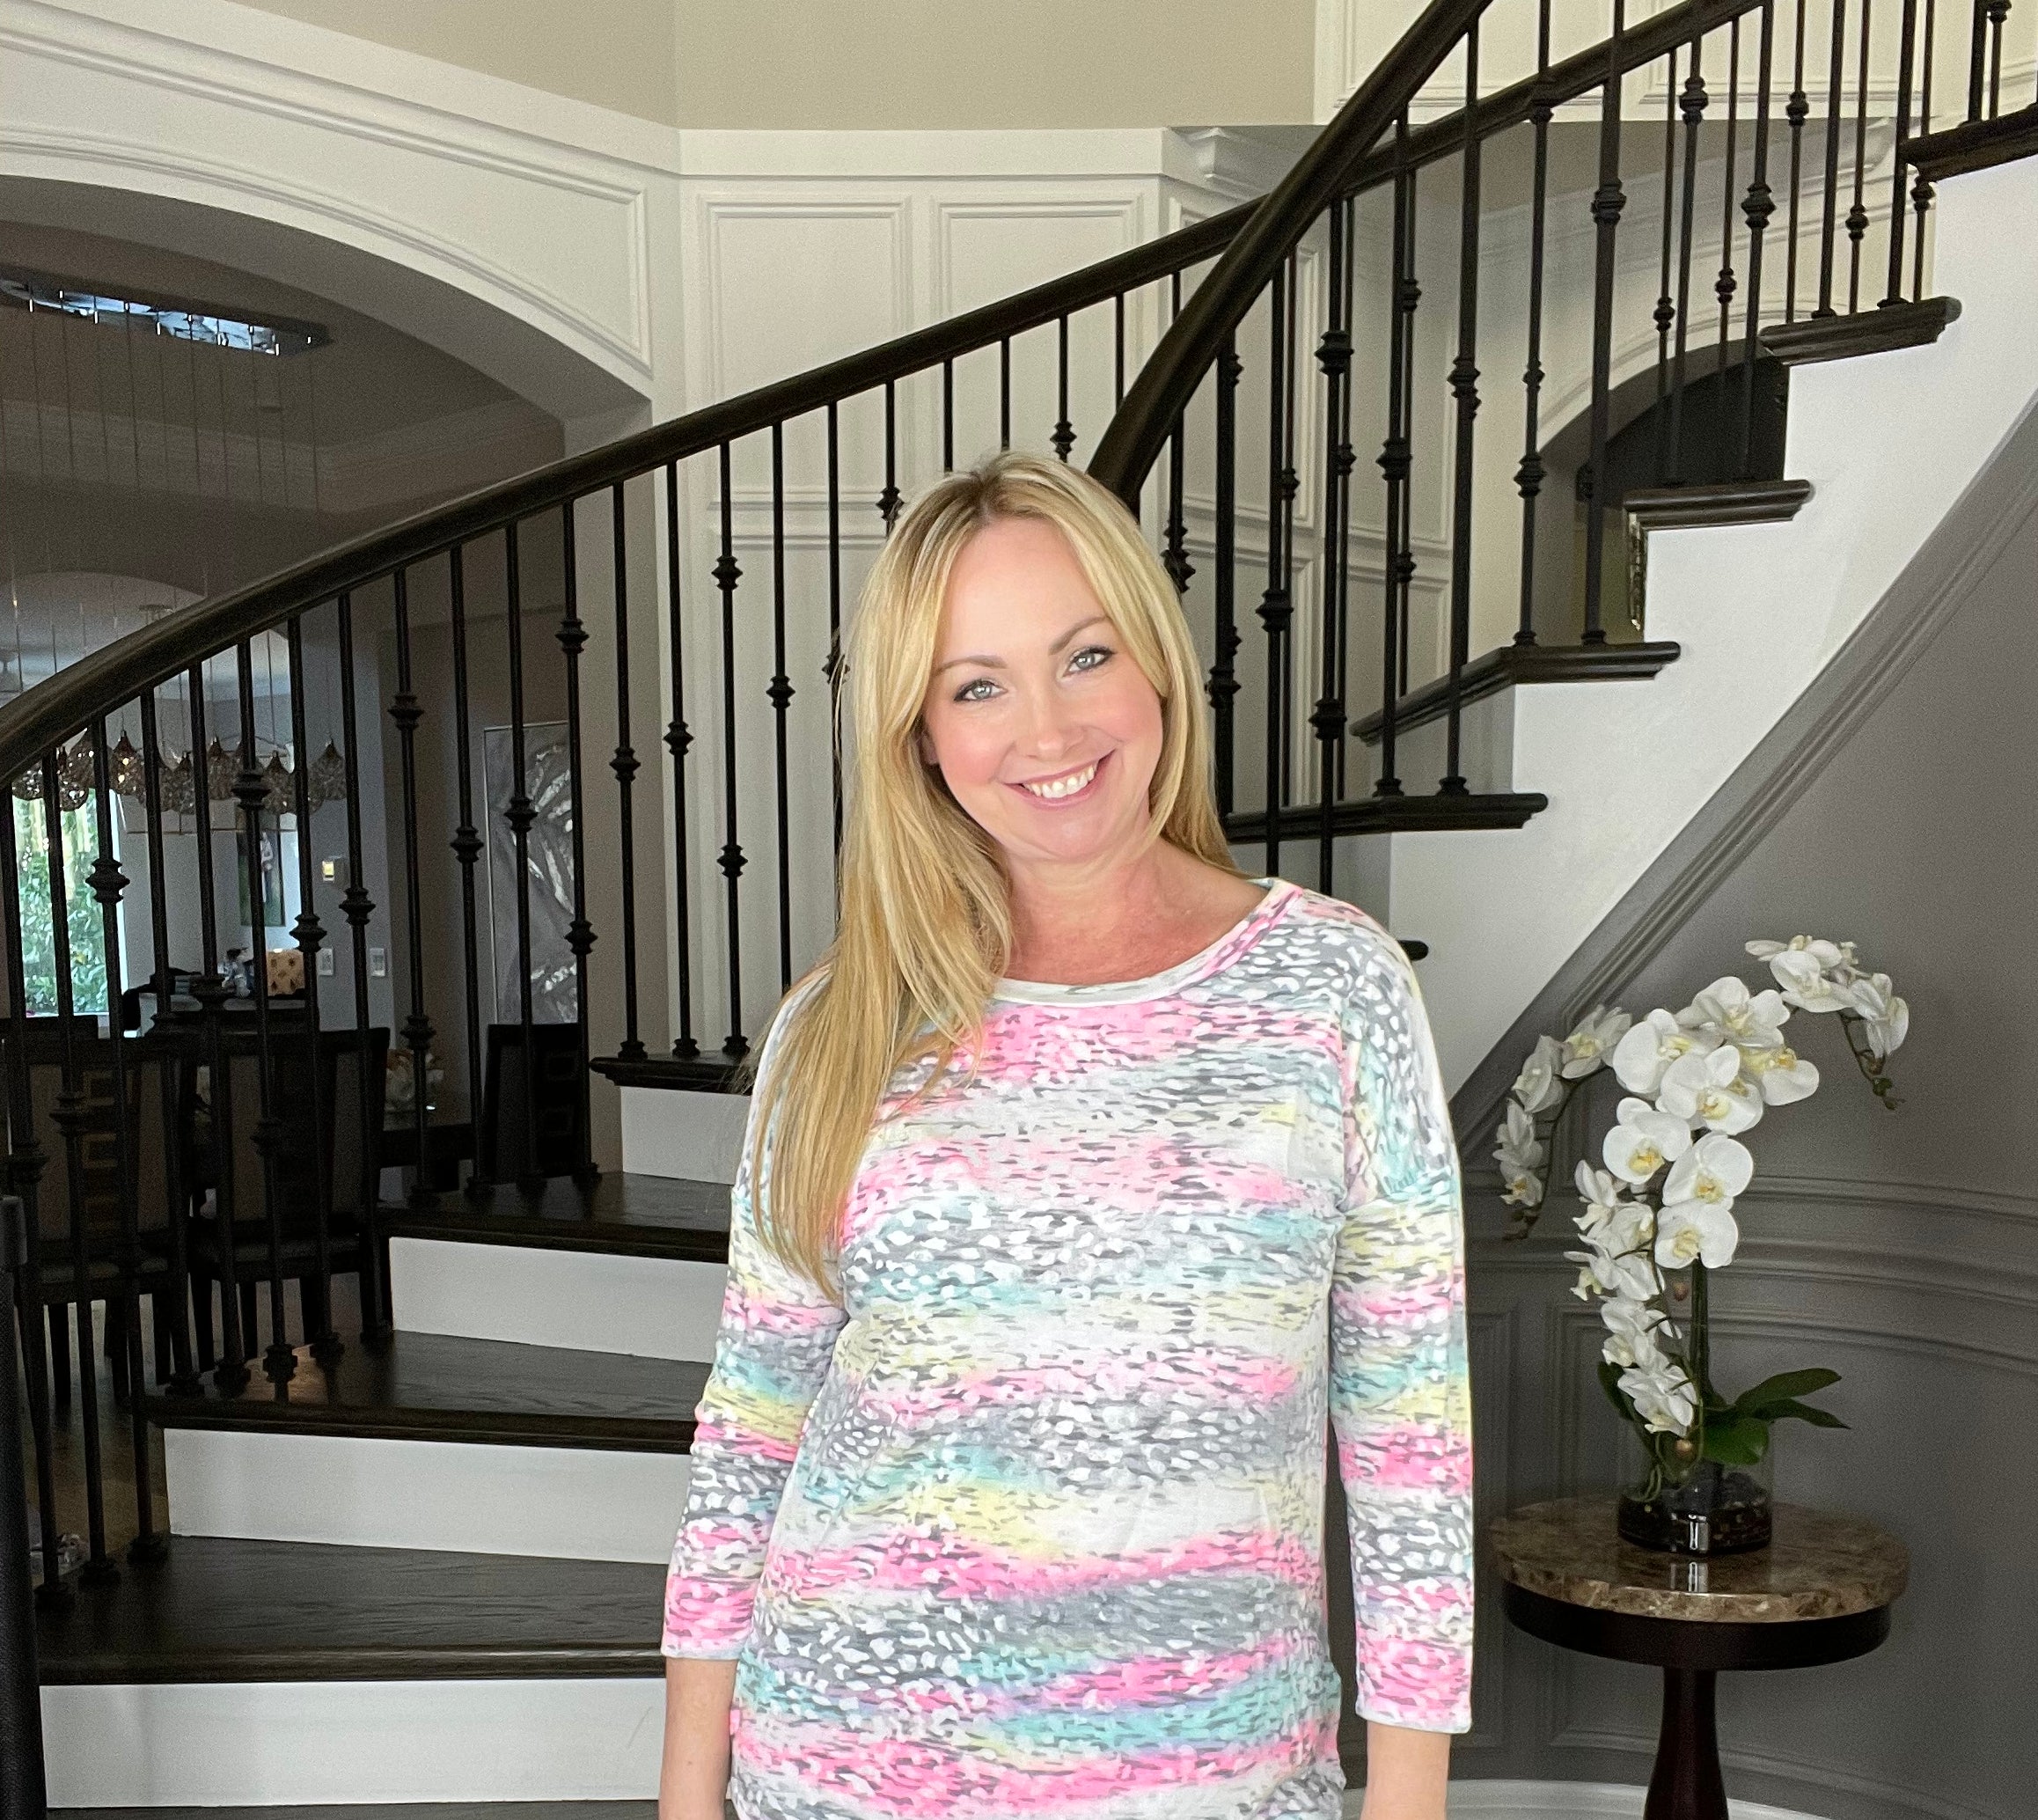 Dear Scarlett Multicolor Top-110 Long Sleeves- Simply Simpson's Boutique is a Women's Online Fashion Boutique Located in Jupiter, Florida